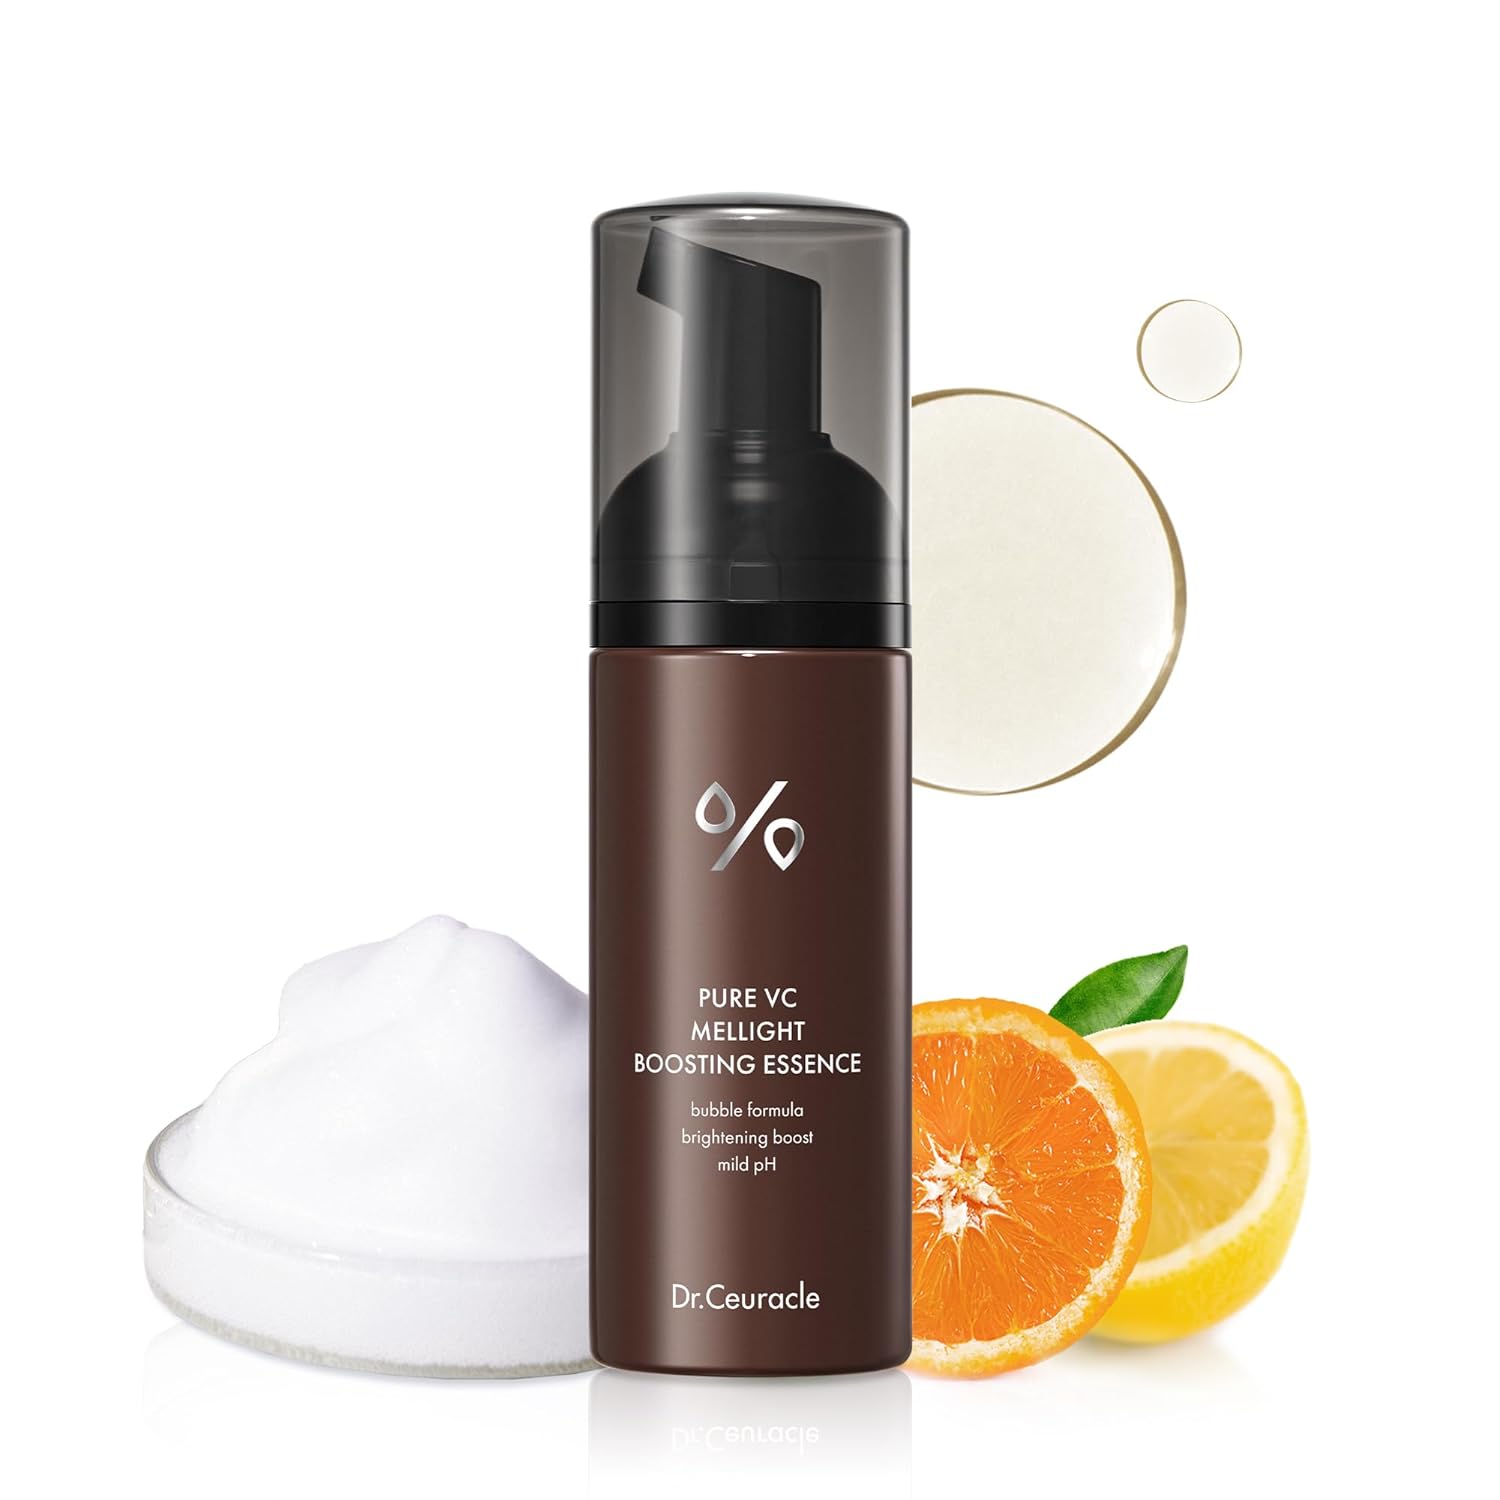 Dr. Ceuracle Pure Vitamin C Mellight Boosting Essence